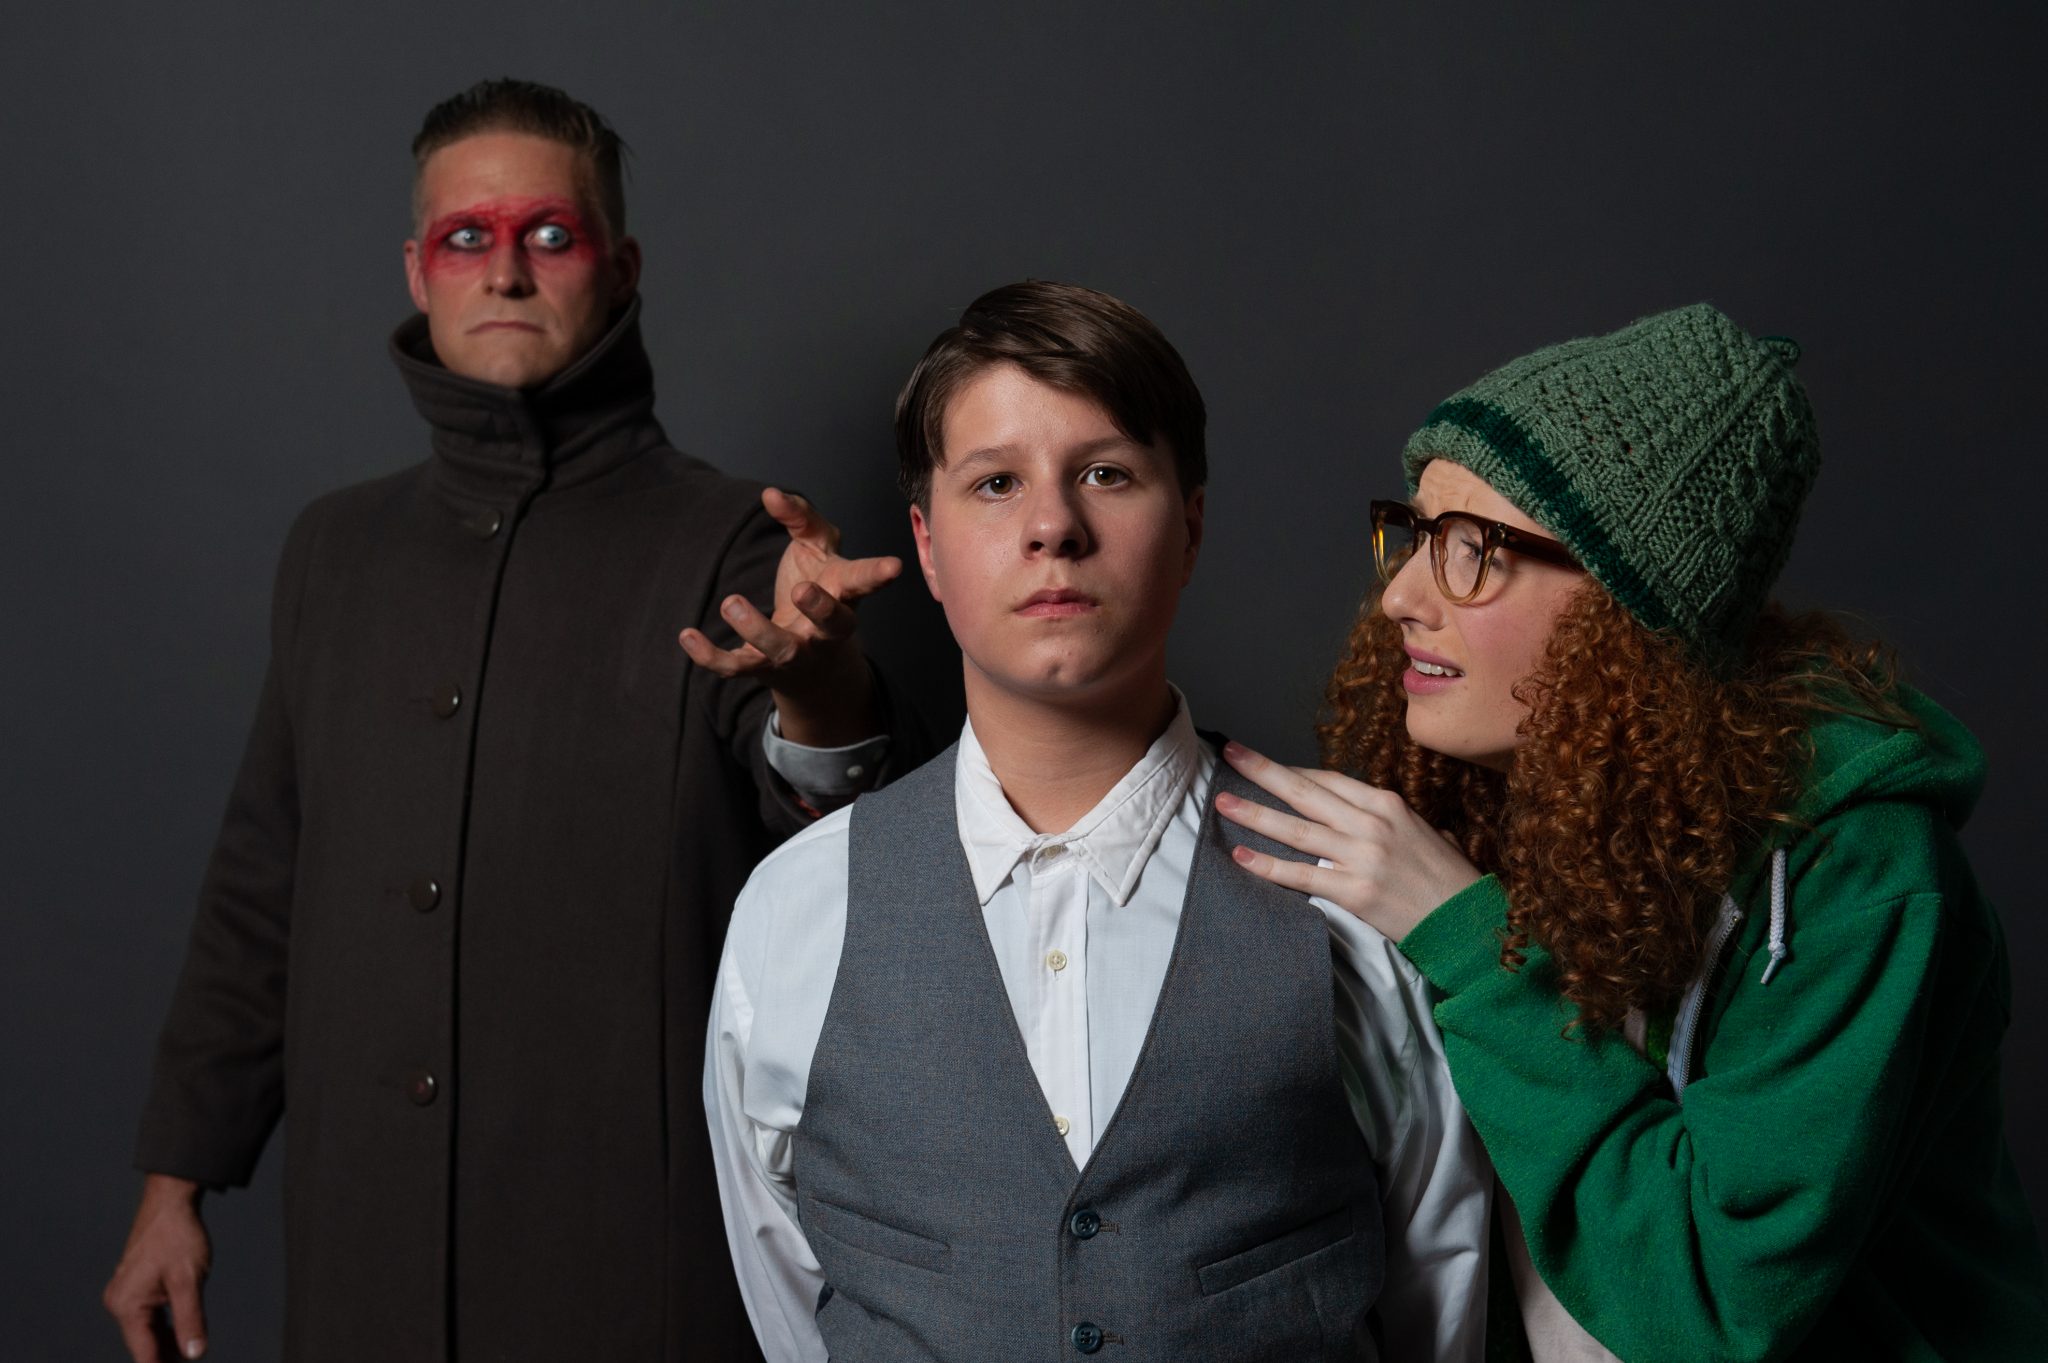 Gallery 7 Theatre Stages Madeleine L’Engle’s Fantastical Adventure, A Wrinkle in Time